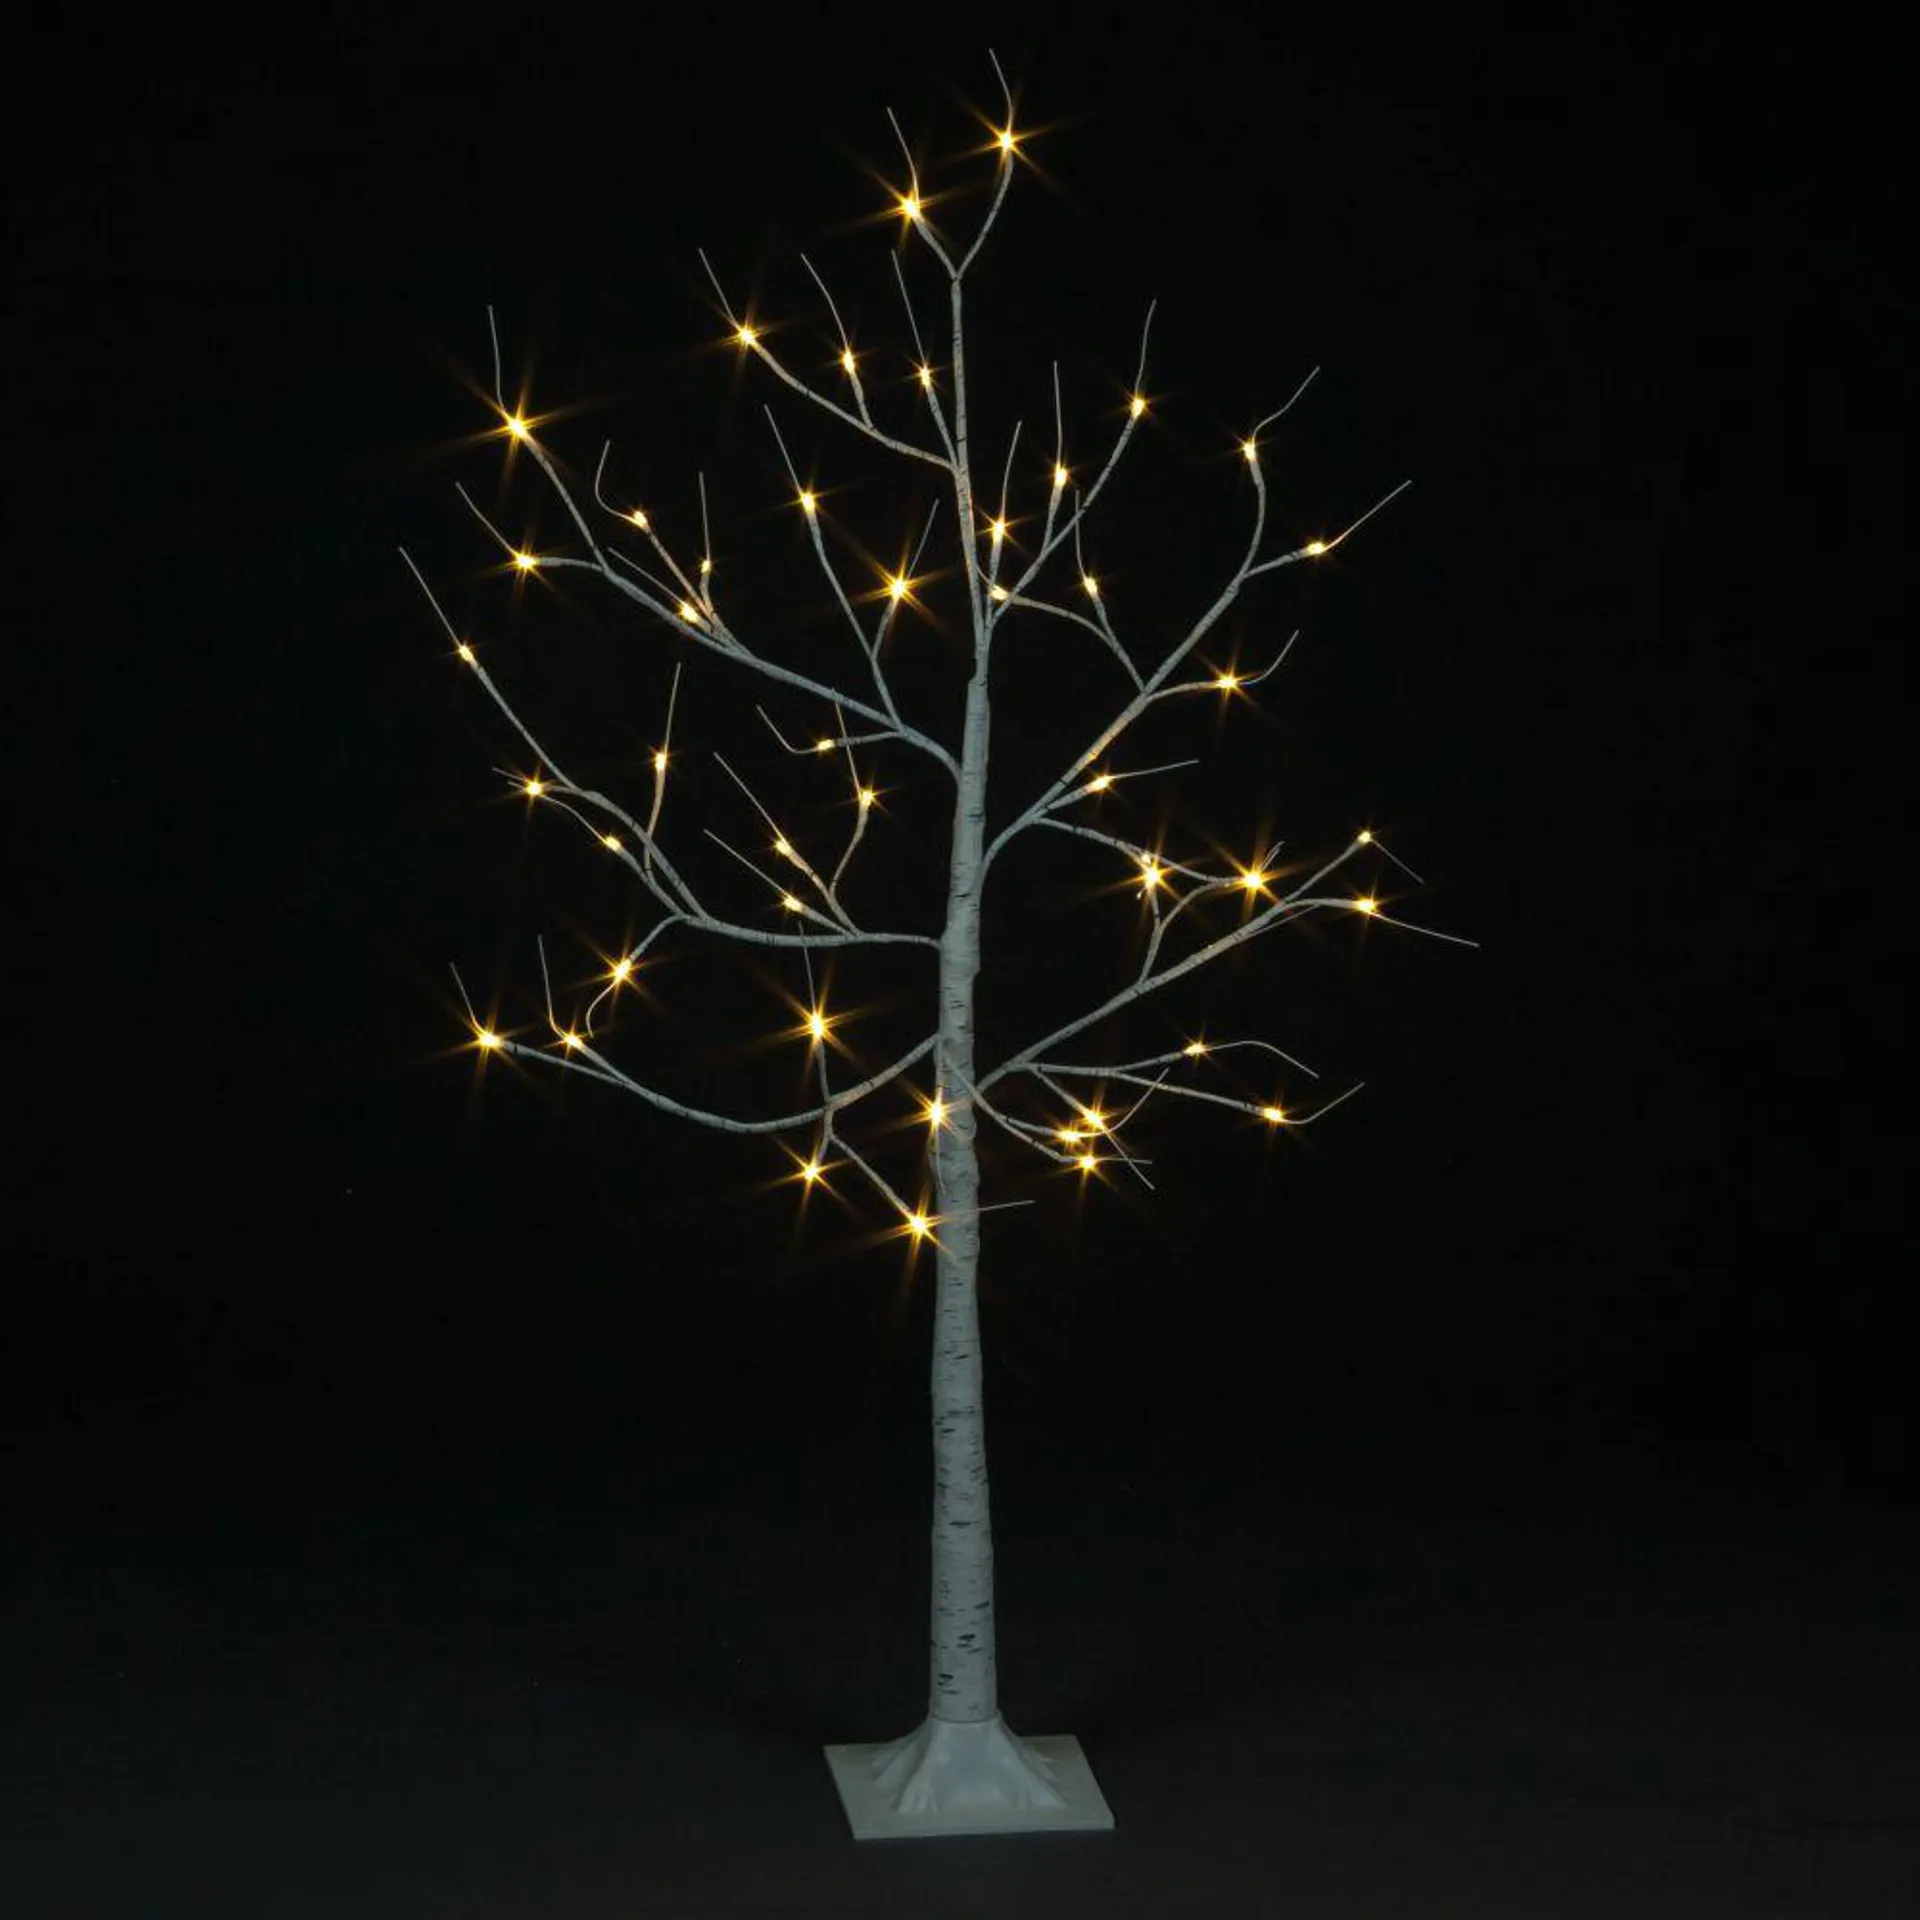 120cm Birch Tree With 48 Warm White LEDs Including 12 Flash Bulbs